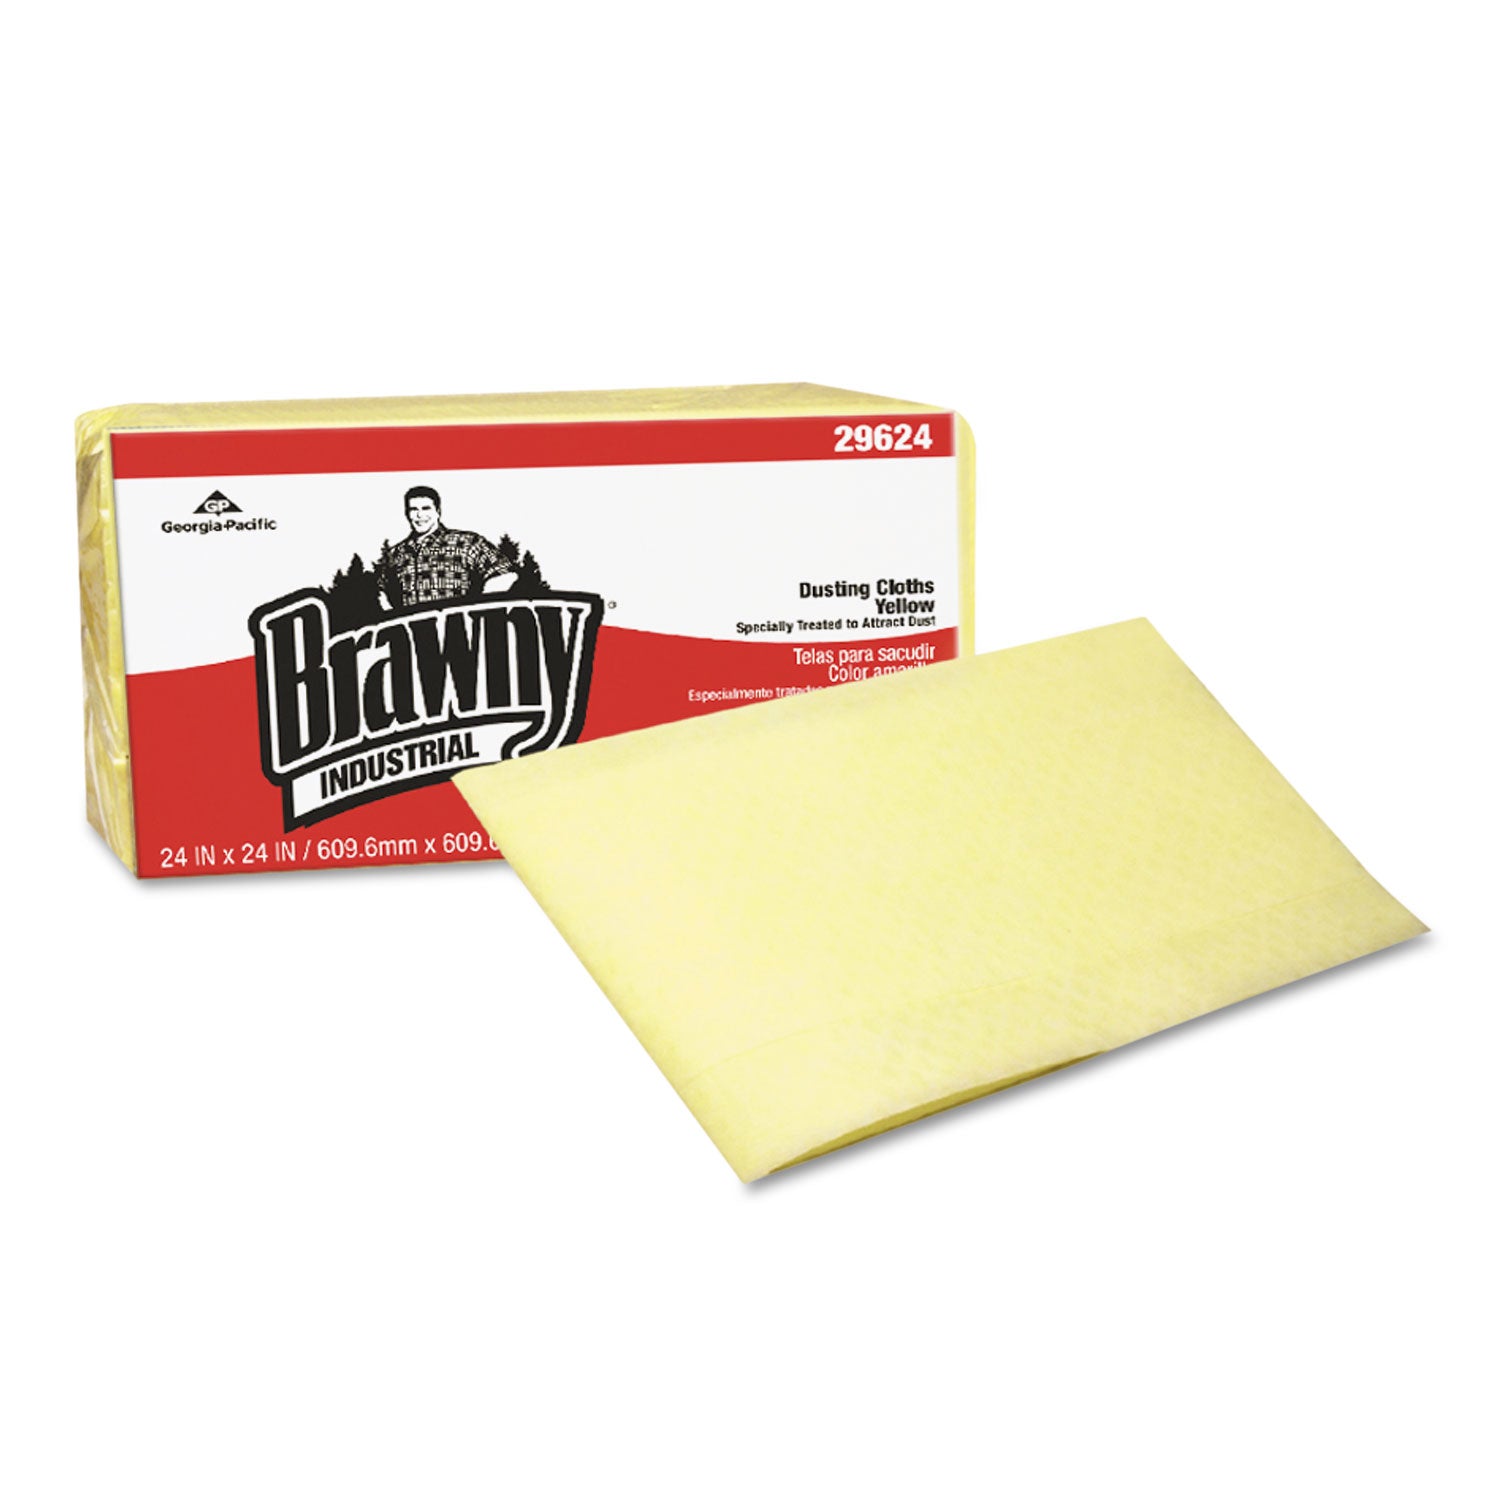 dusting-cloths-quarterfold-24-x-24-unscented-yellow-50-pack-4-packs-carton_gpc29624 - 1